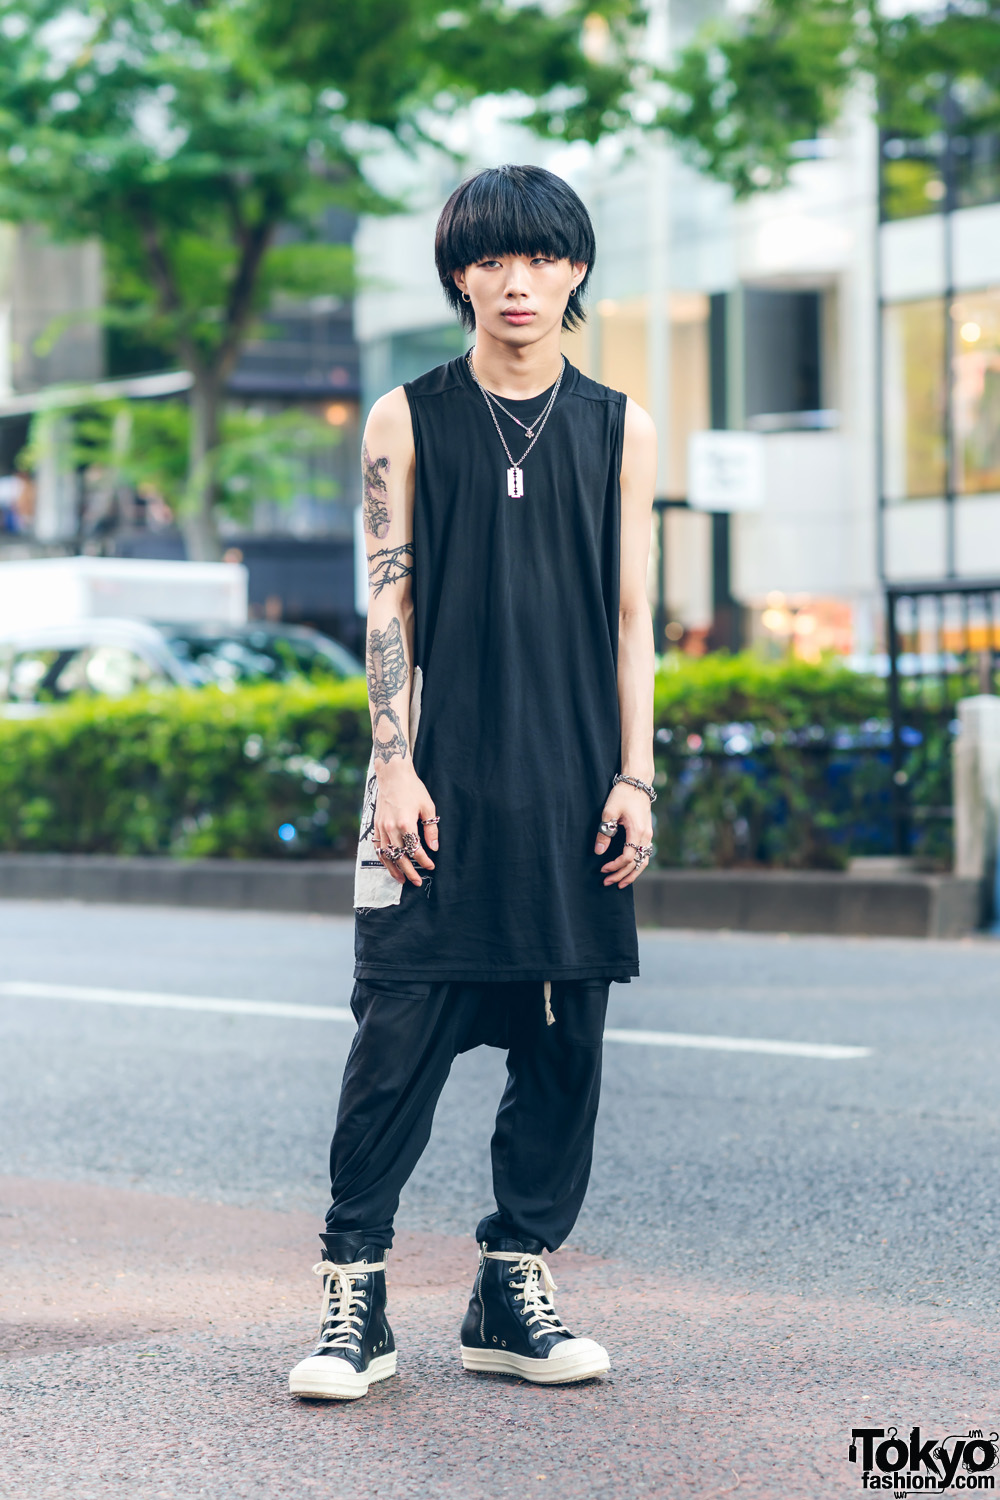 Rick Owens Monochrome Streetwear Style w/ Arm Tattoos, I'm Praying To The Aliens Long Shirt, Loose Pants, Tokyo Human Experiments Rings & High Top Sneakers